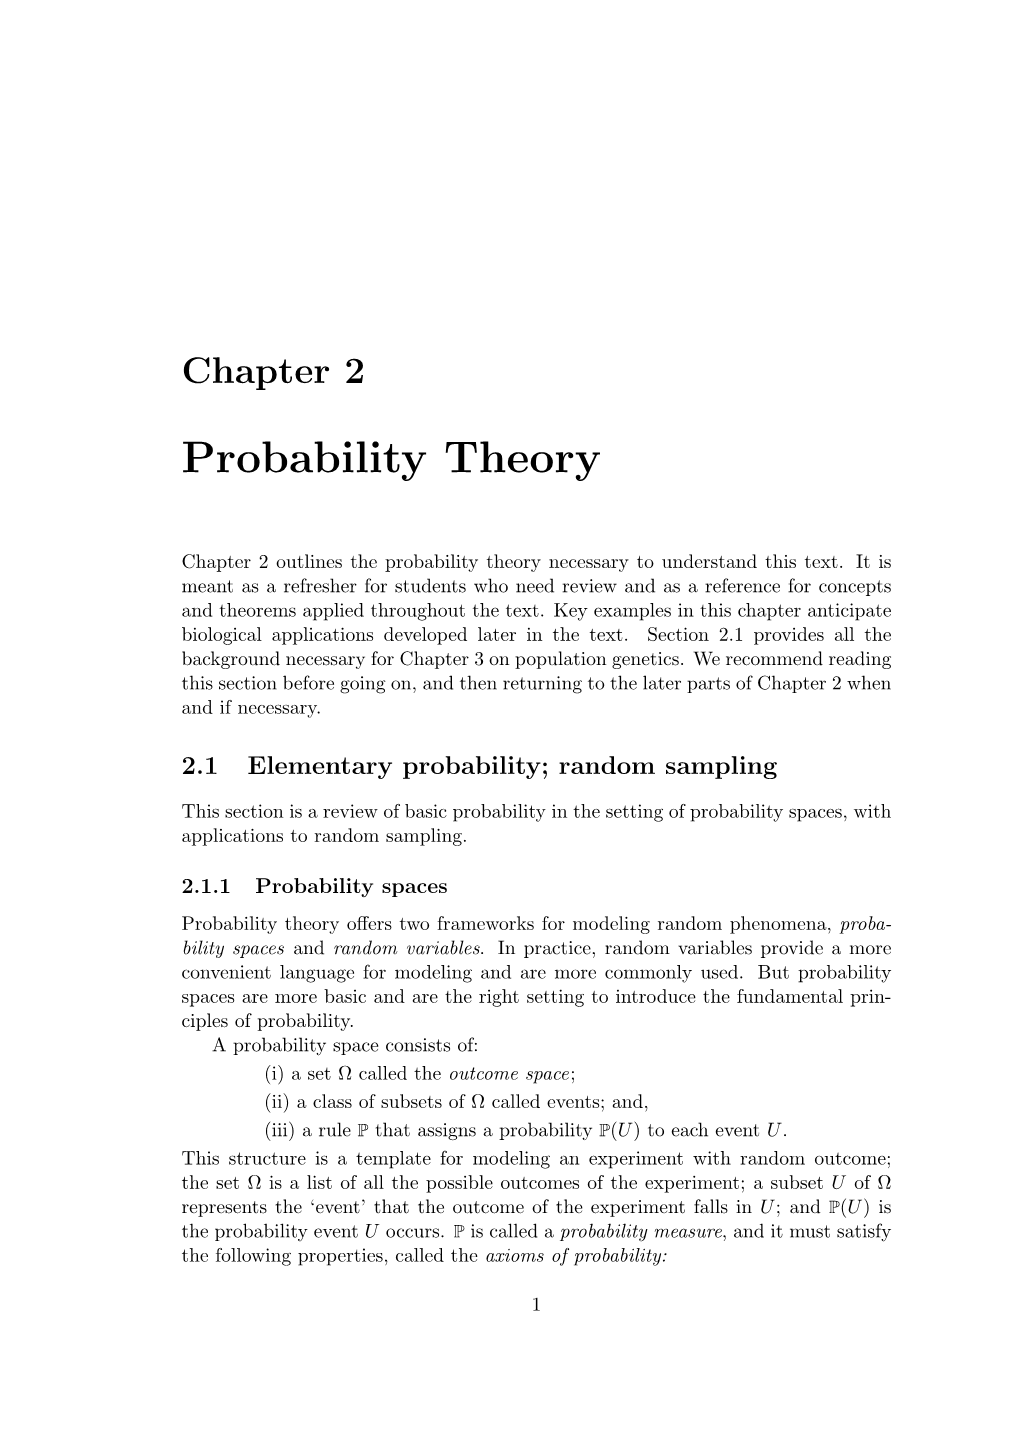 Chapter 2, Probability Theory